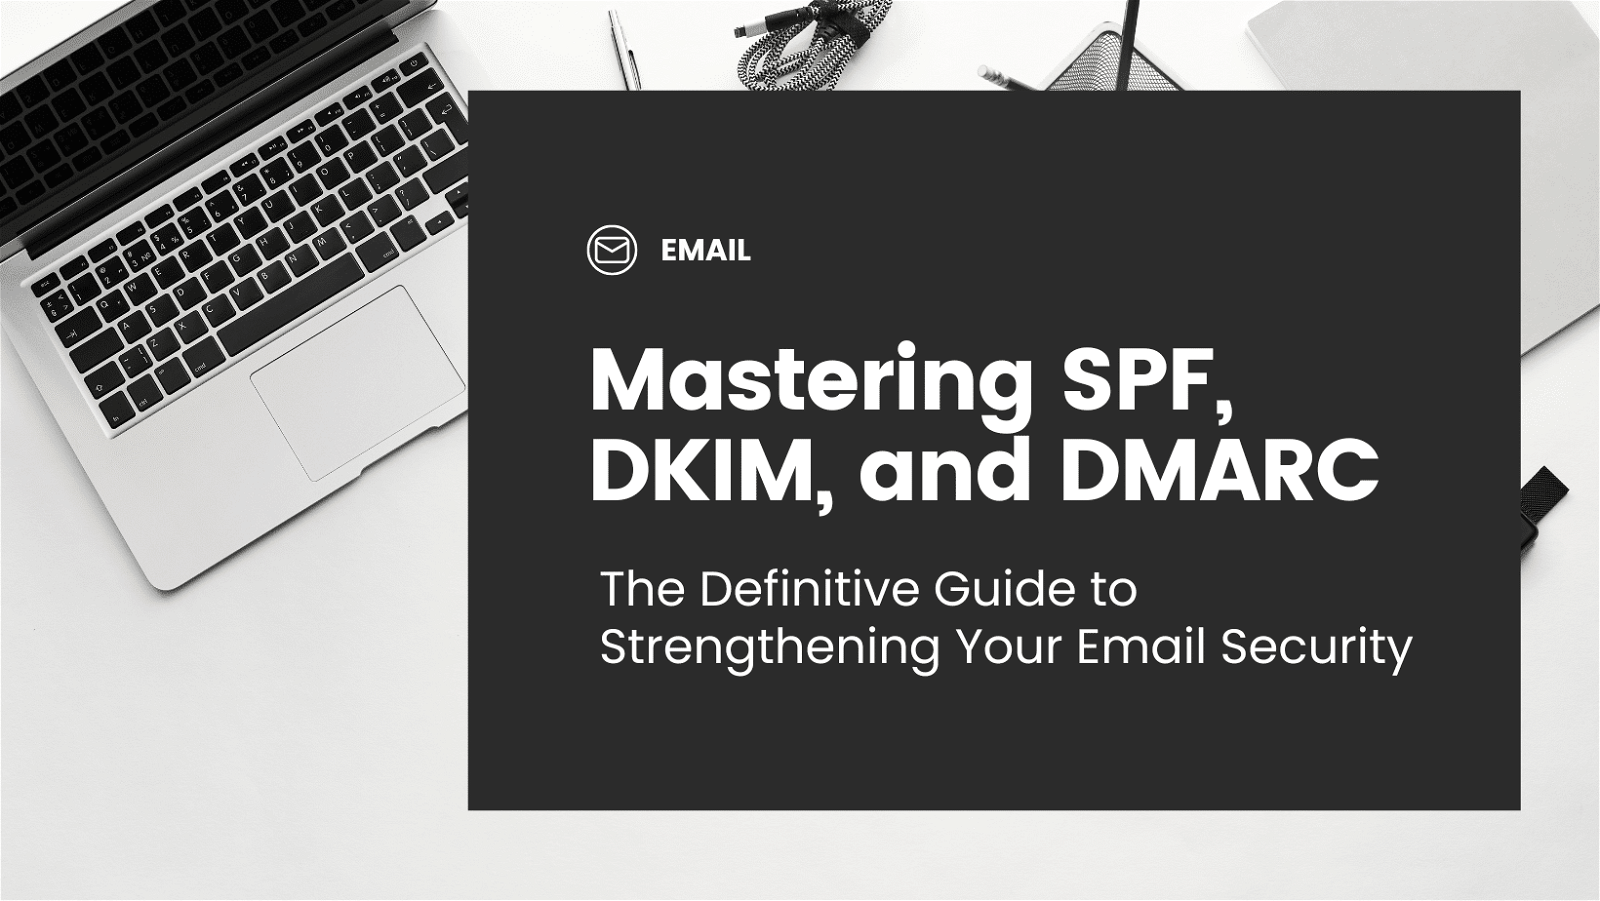 Modern workspace featuring a laptop and a guide on email security focusing on SPF, DKIM, and DMARC.